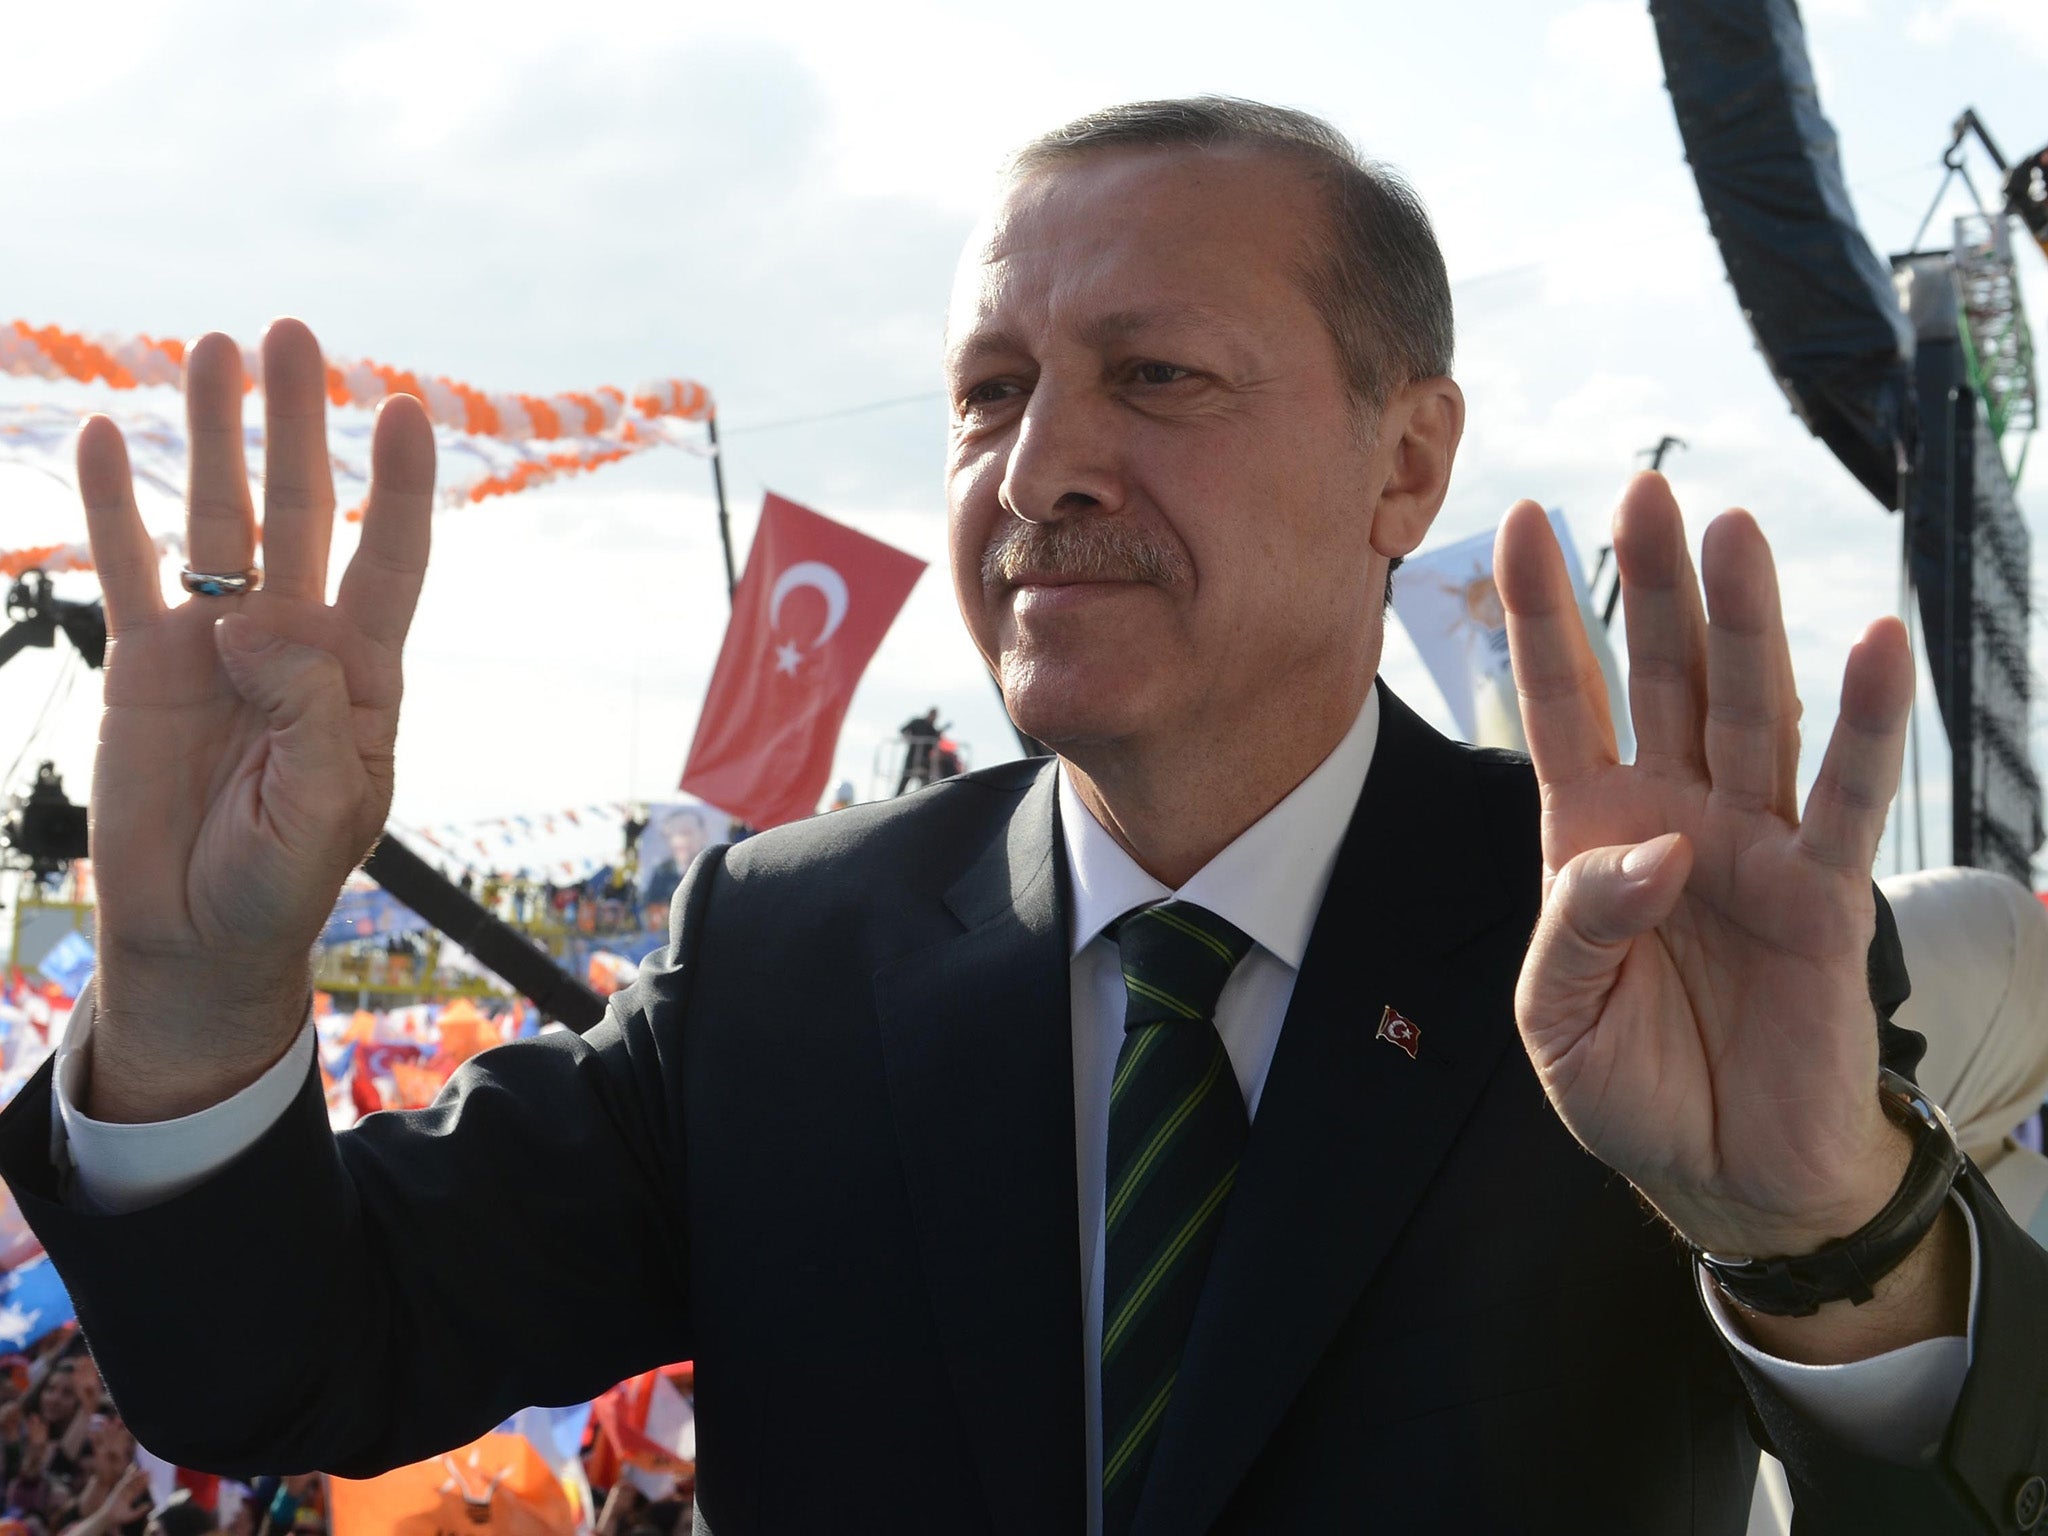 Erdogan at a recent rally in the run up to key local elections this month